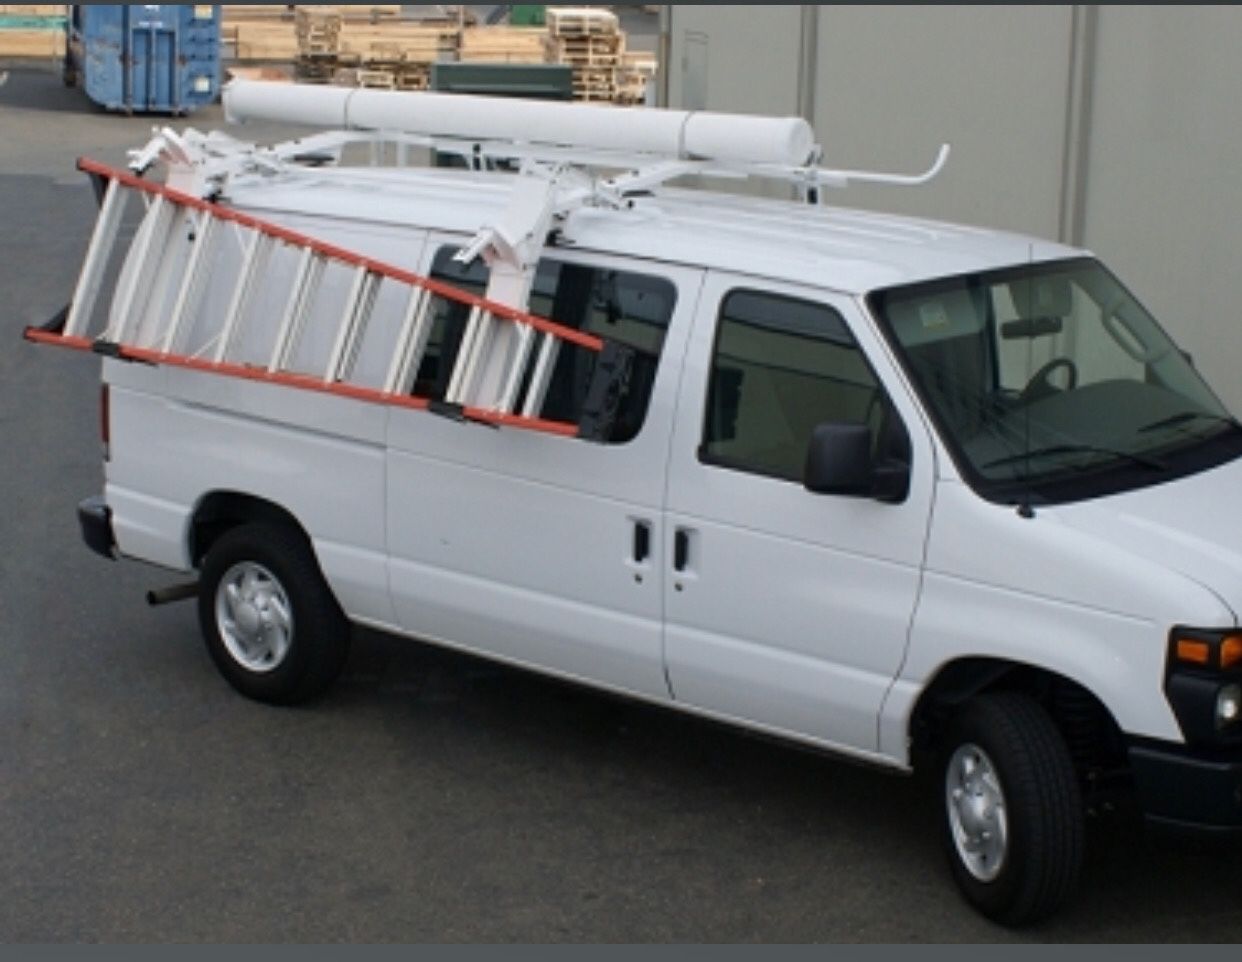 The Kargo Master Drop Down Ladder Rack is uniquely designed and engineered to gently lower and raise ladder into position for easy loading and unloa